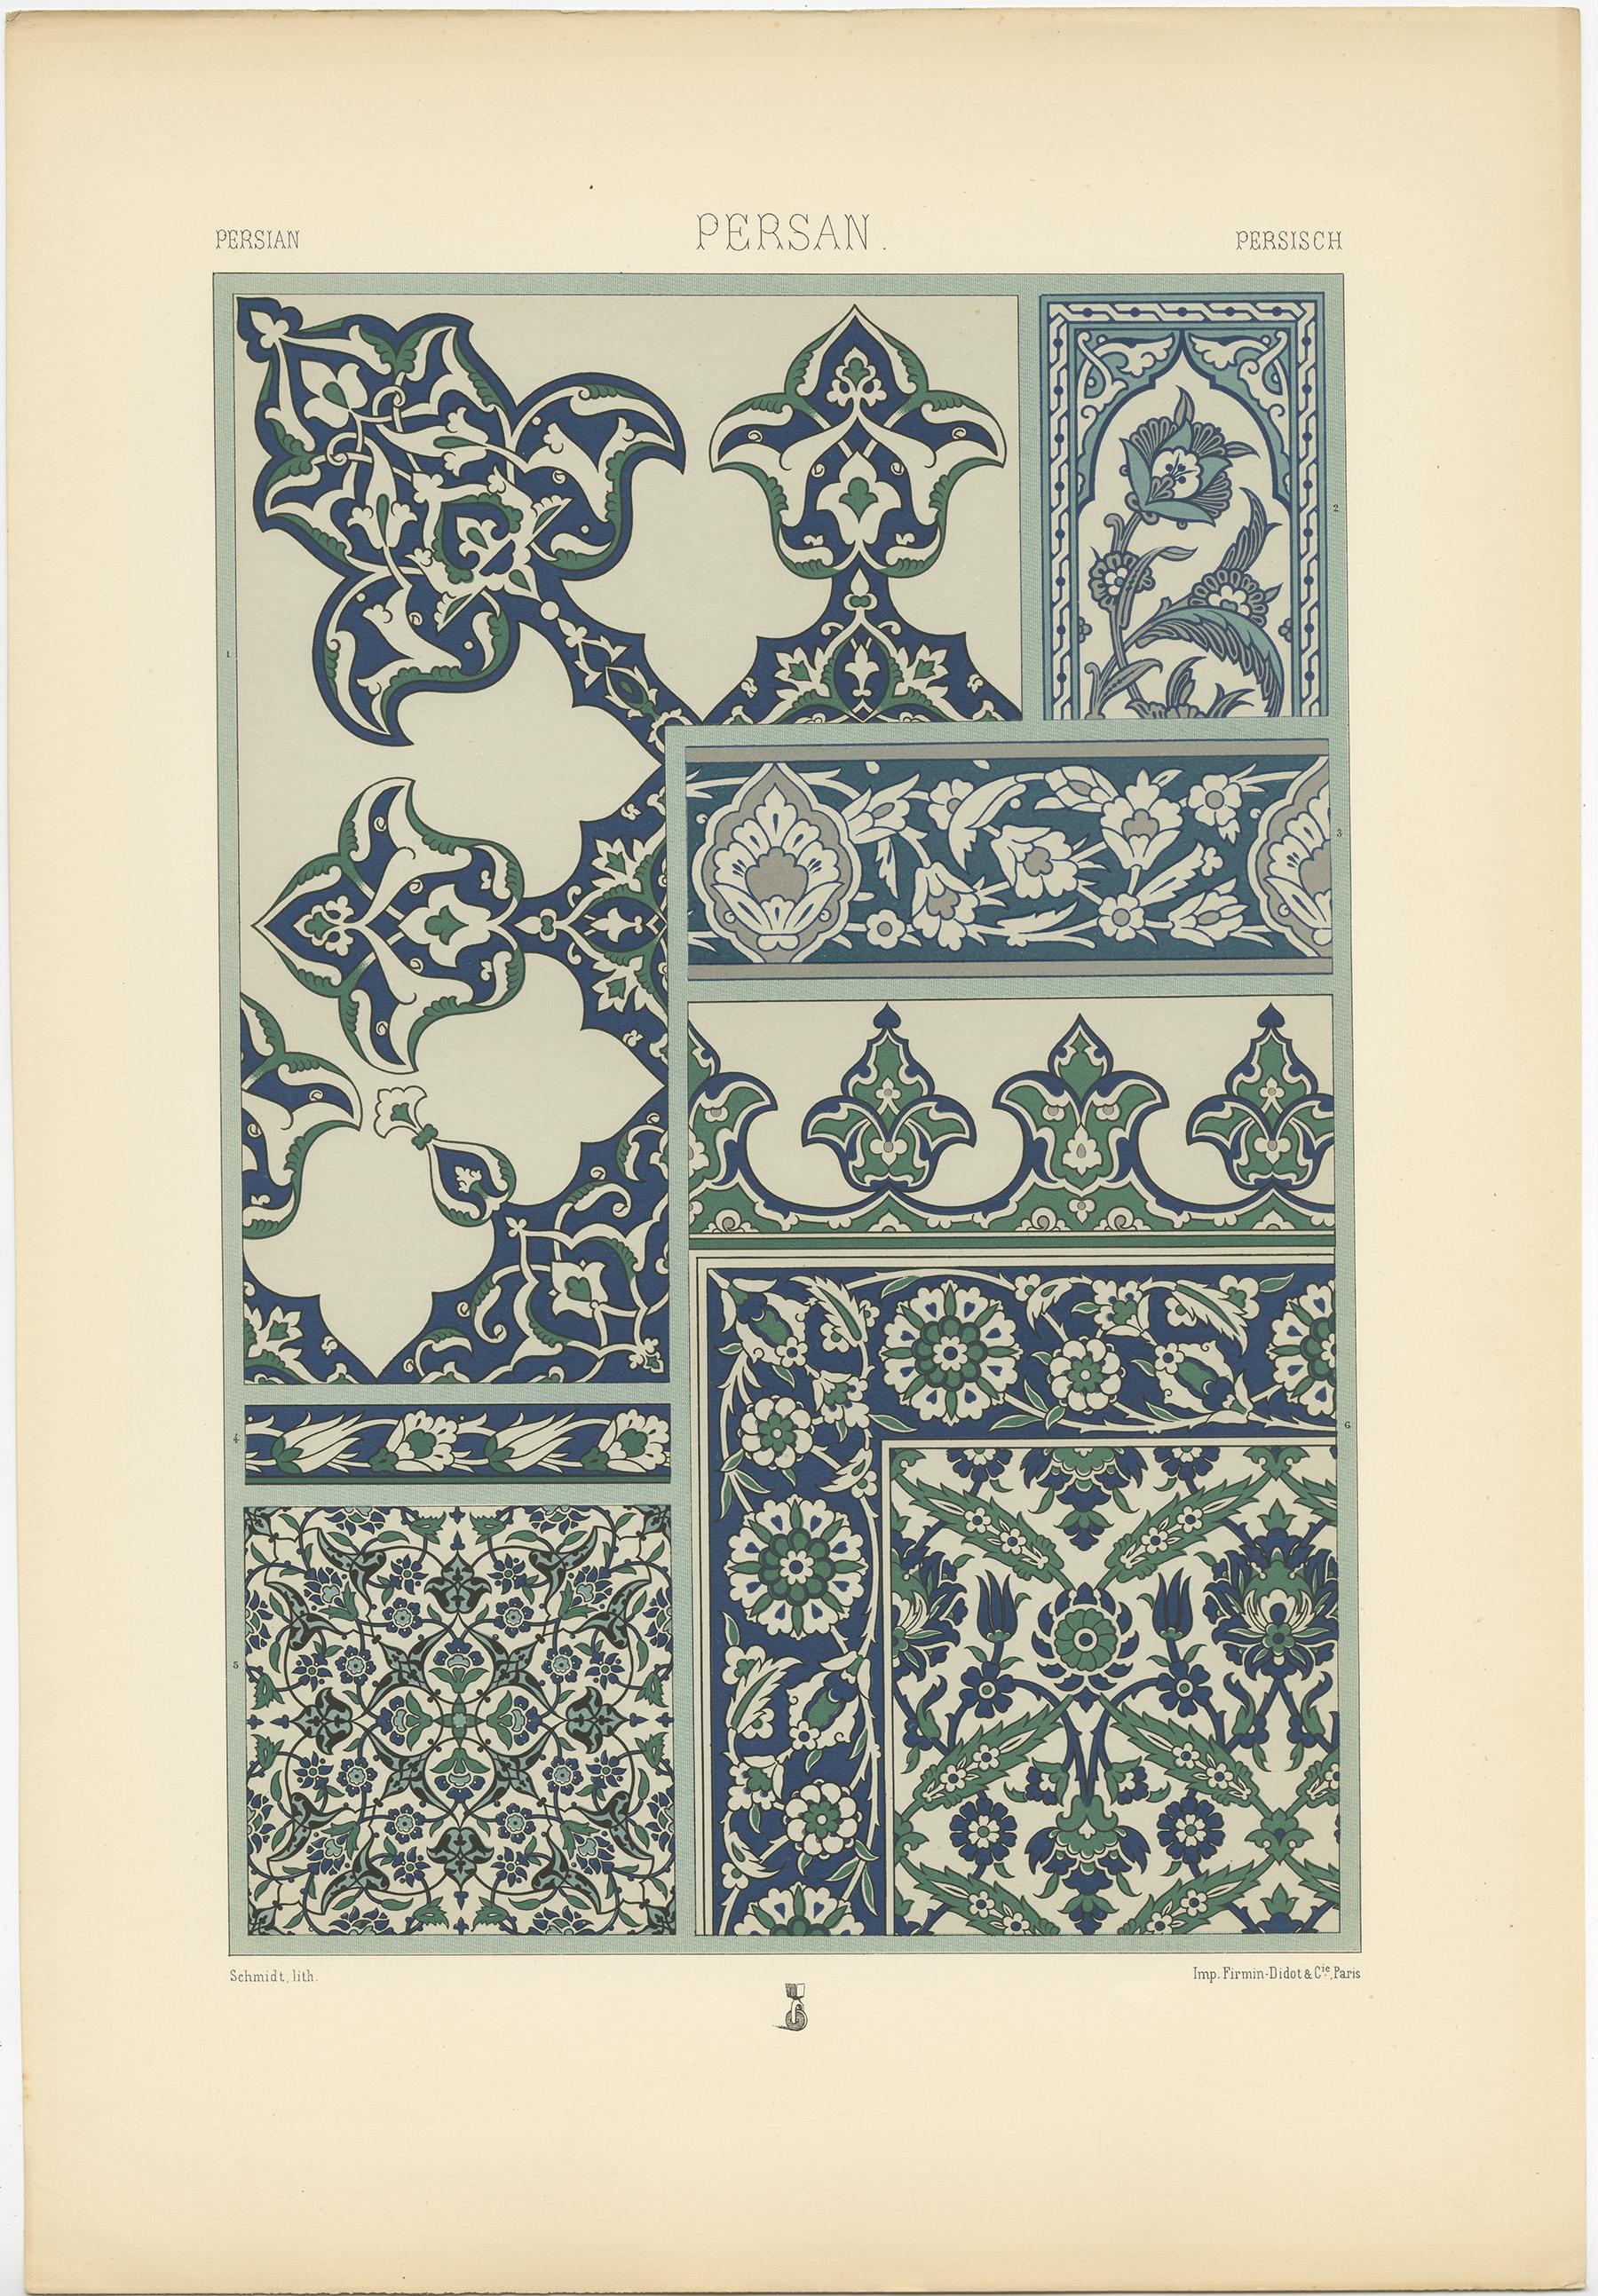 Antique print titled 'Persian -Persan-Persisch'. Chromolithograph of Design from Enameled and glazed wall tiles ornaments. This print originates from 'l'Ornement Polychrome' by Auguste Racinet. Published, circa 1890.